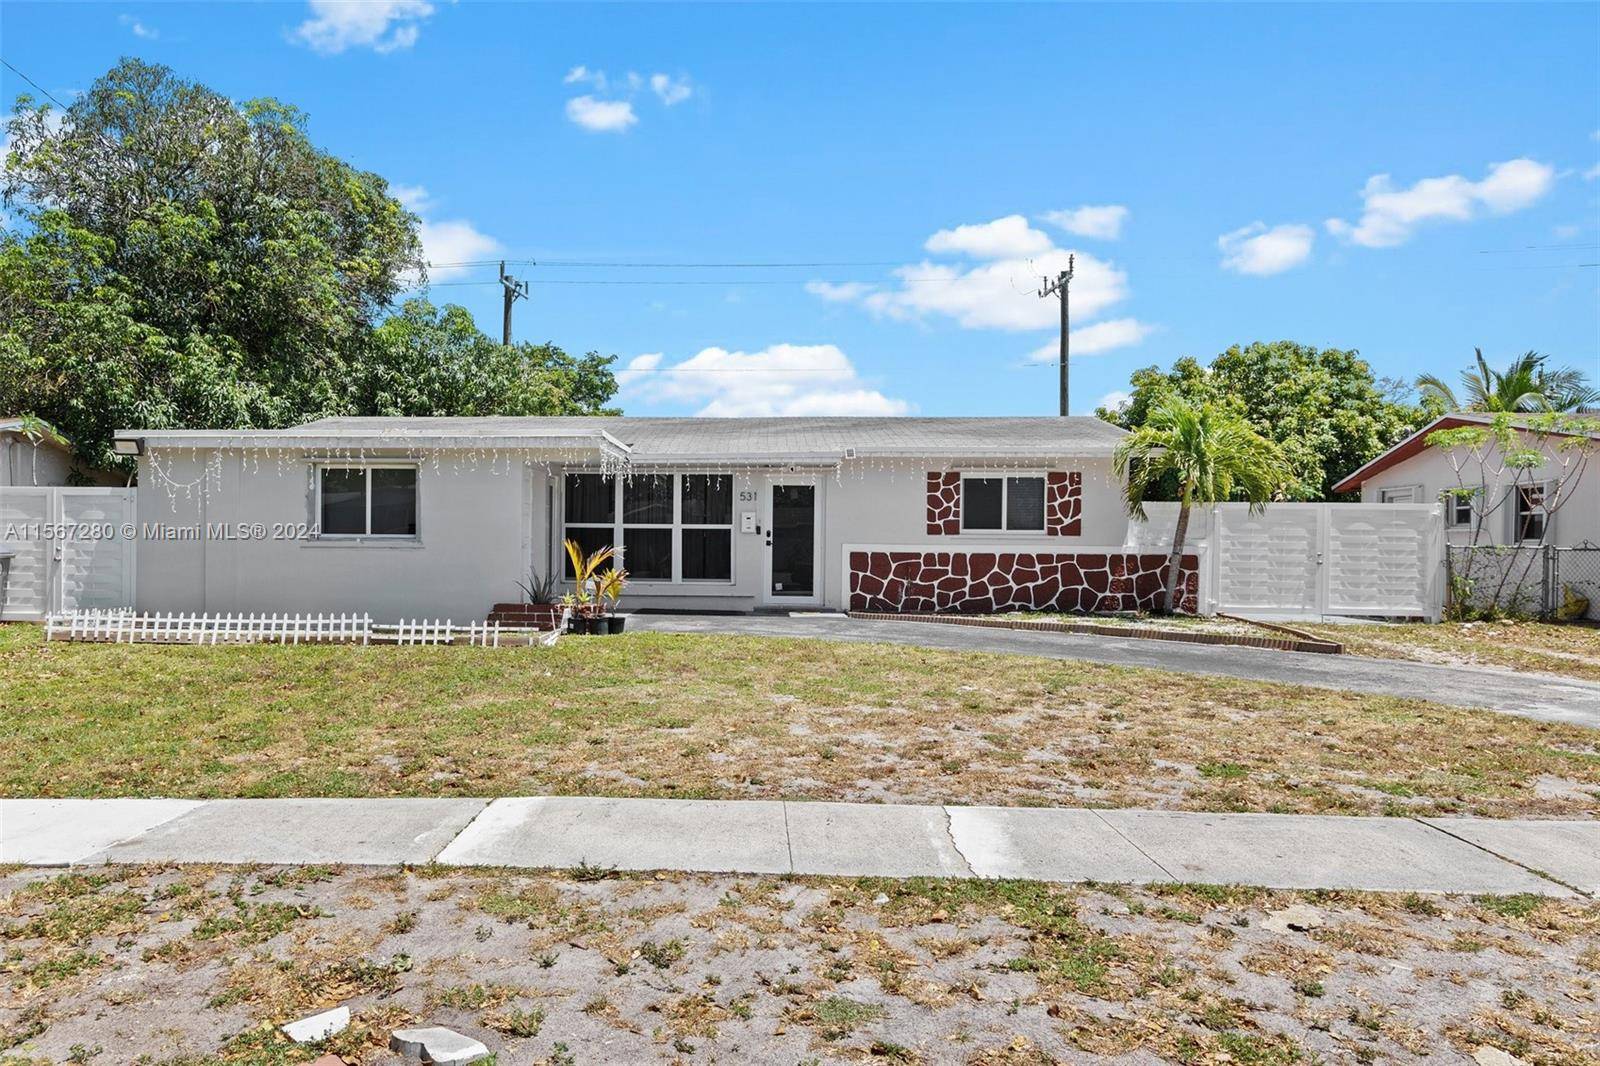 Great opportunity to own or invest property, renovated 3 bedroom 2 bathroom home in the great city of Pembroke Pines.